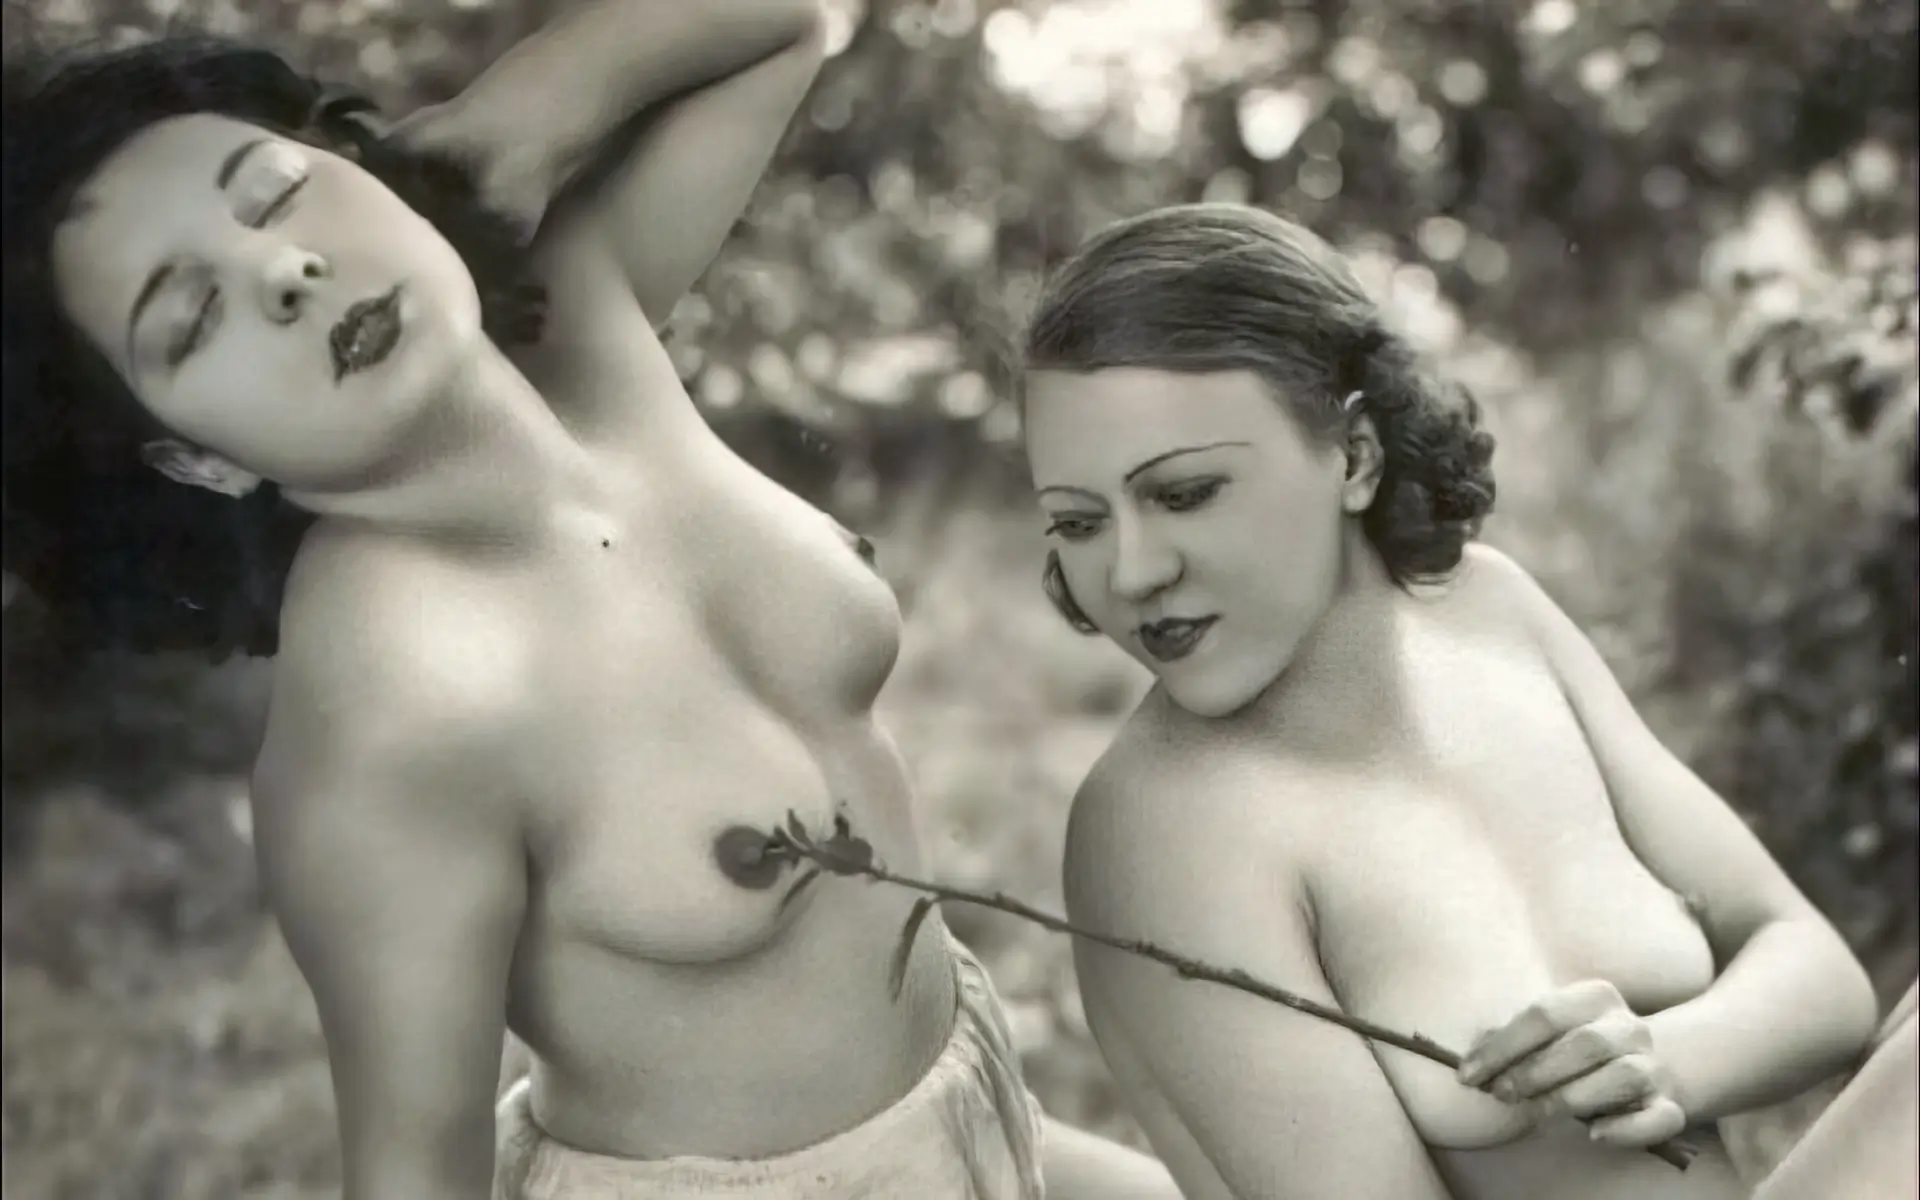 Two vintage teens enjoy touching each other's tits